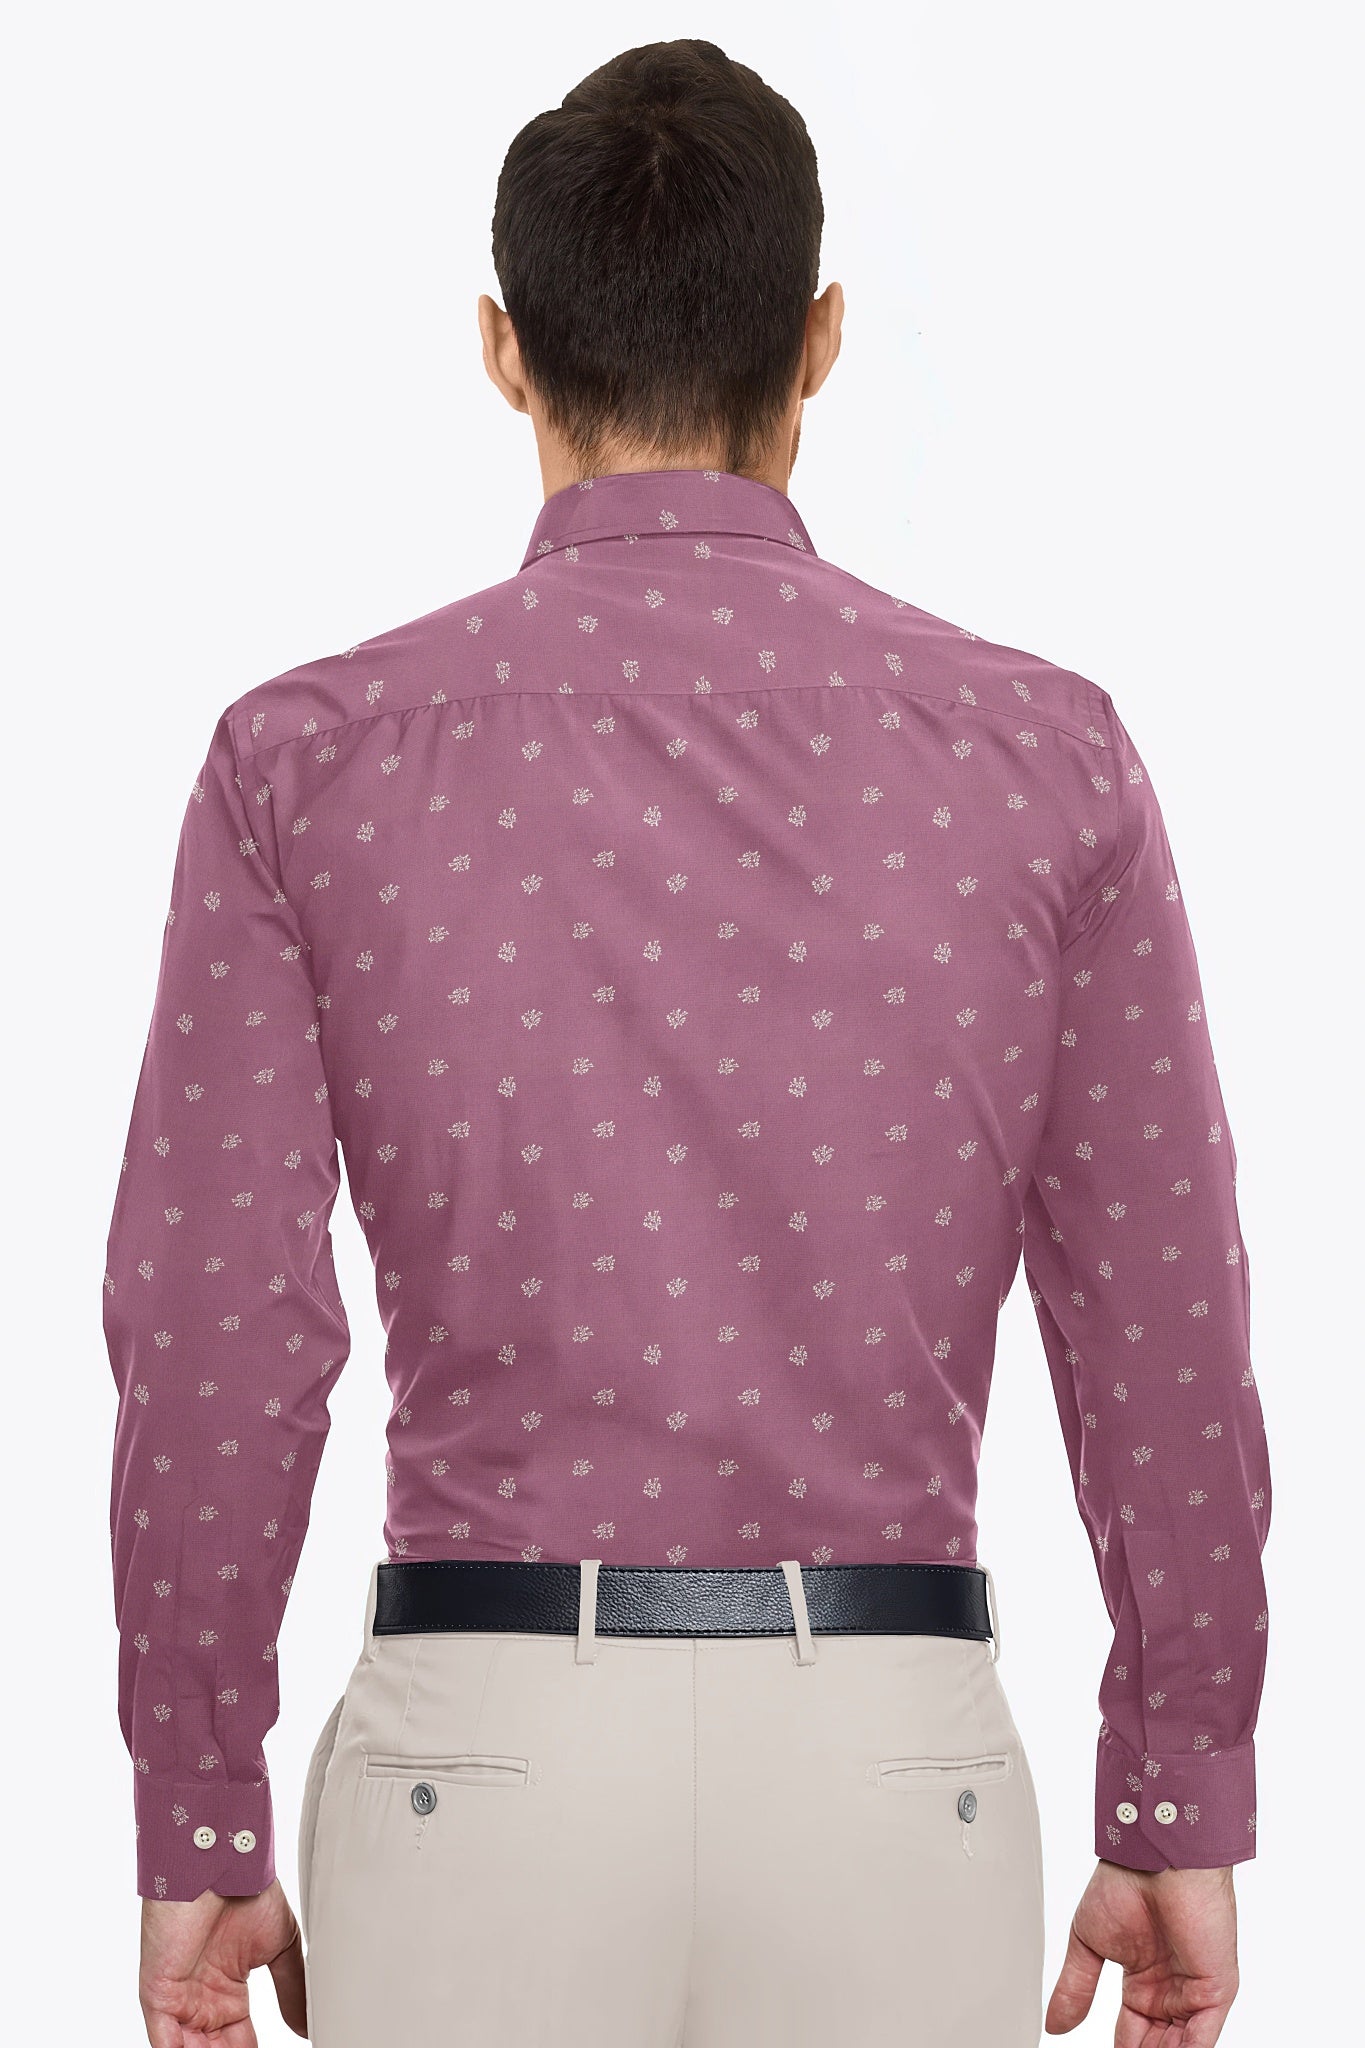 Polignac Pink and White Oleander Plant Printed Cotton Shirt